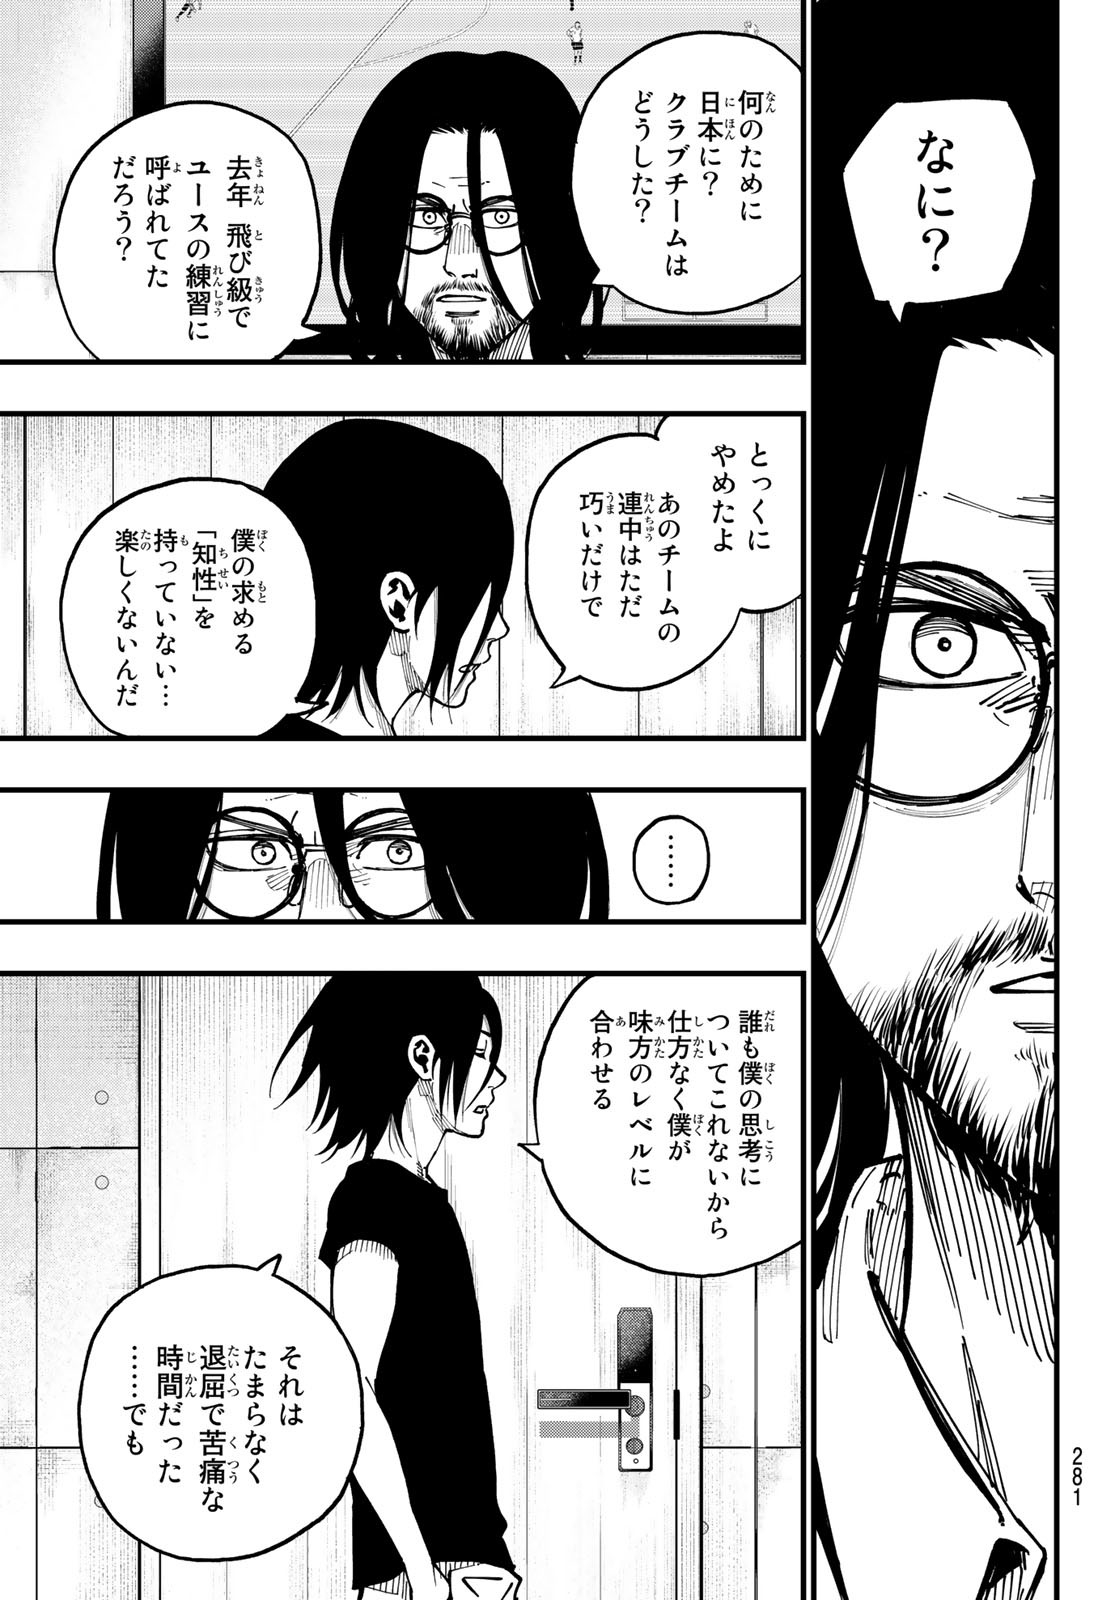 iコンタクト.iContact 第11話 - Page 5